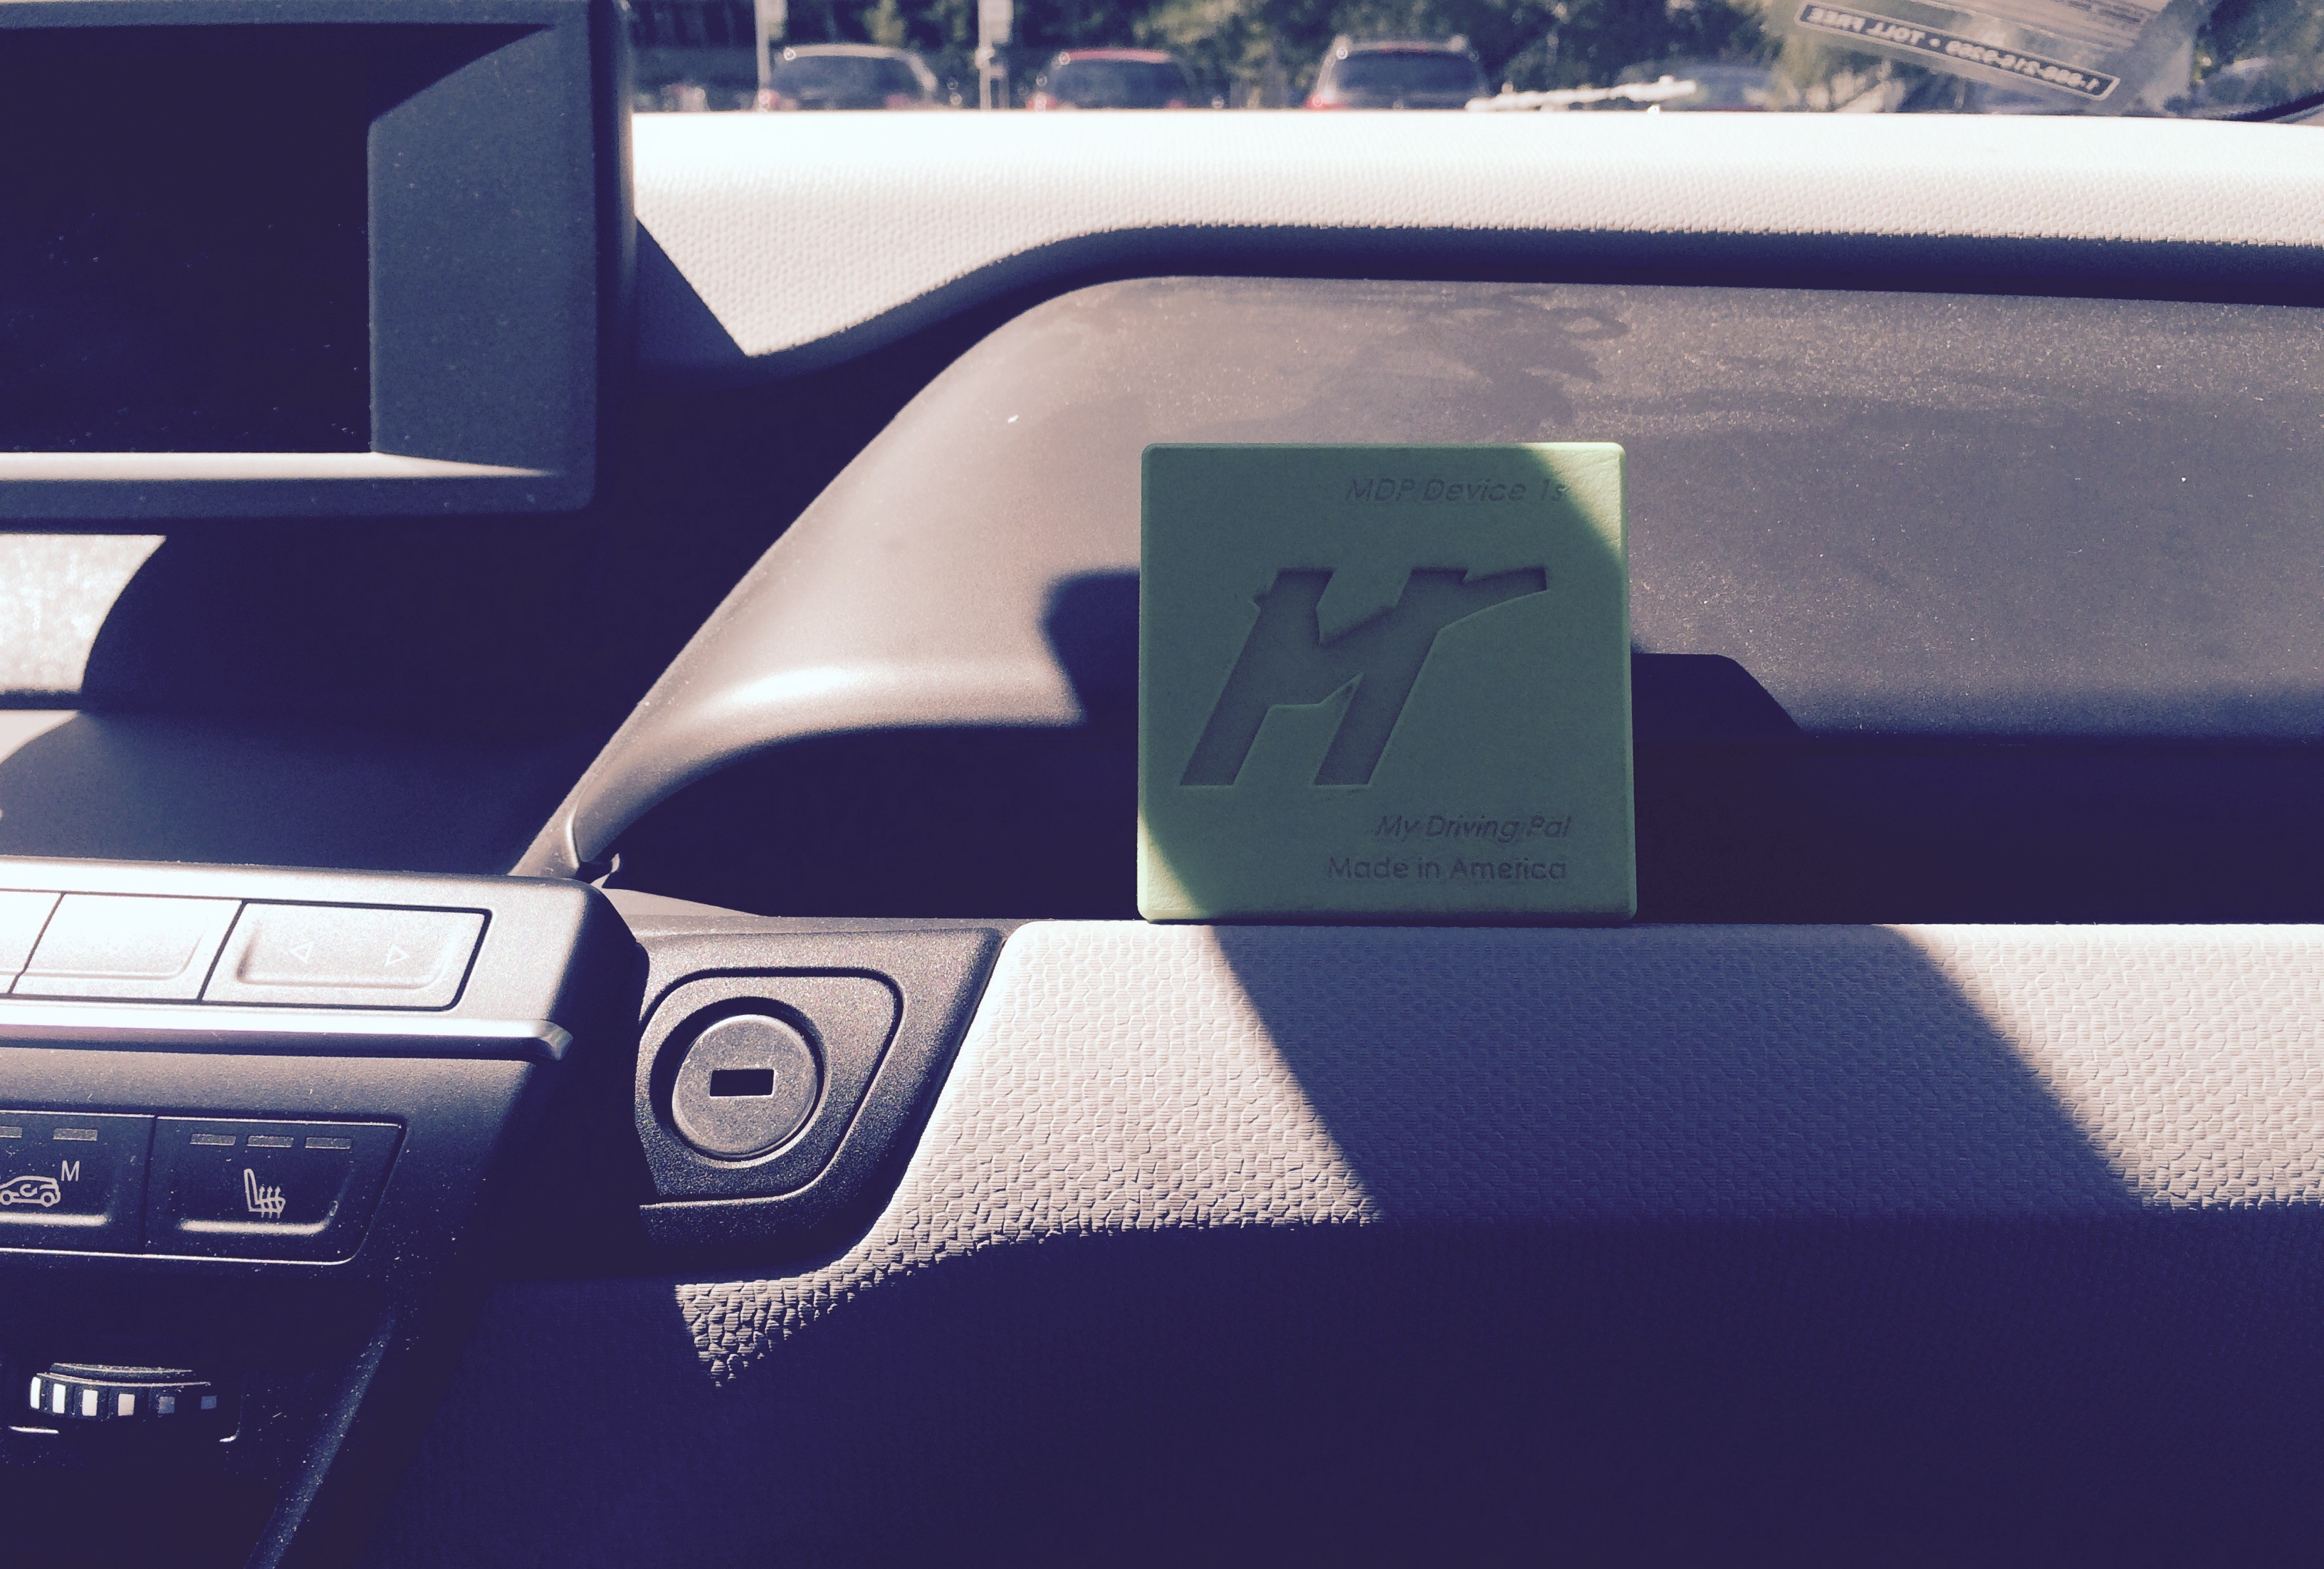 My Driving Pal is your next 3D Printed smart tracker | Sculpteo Blog